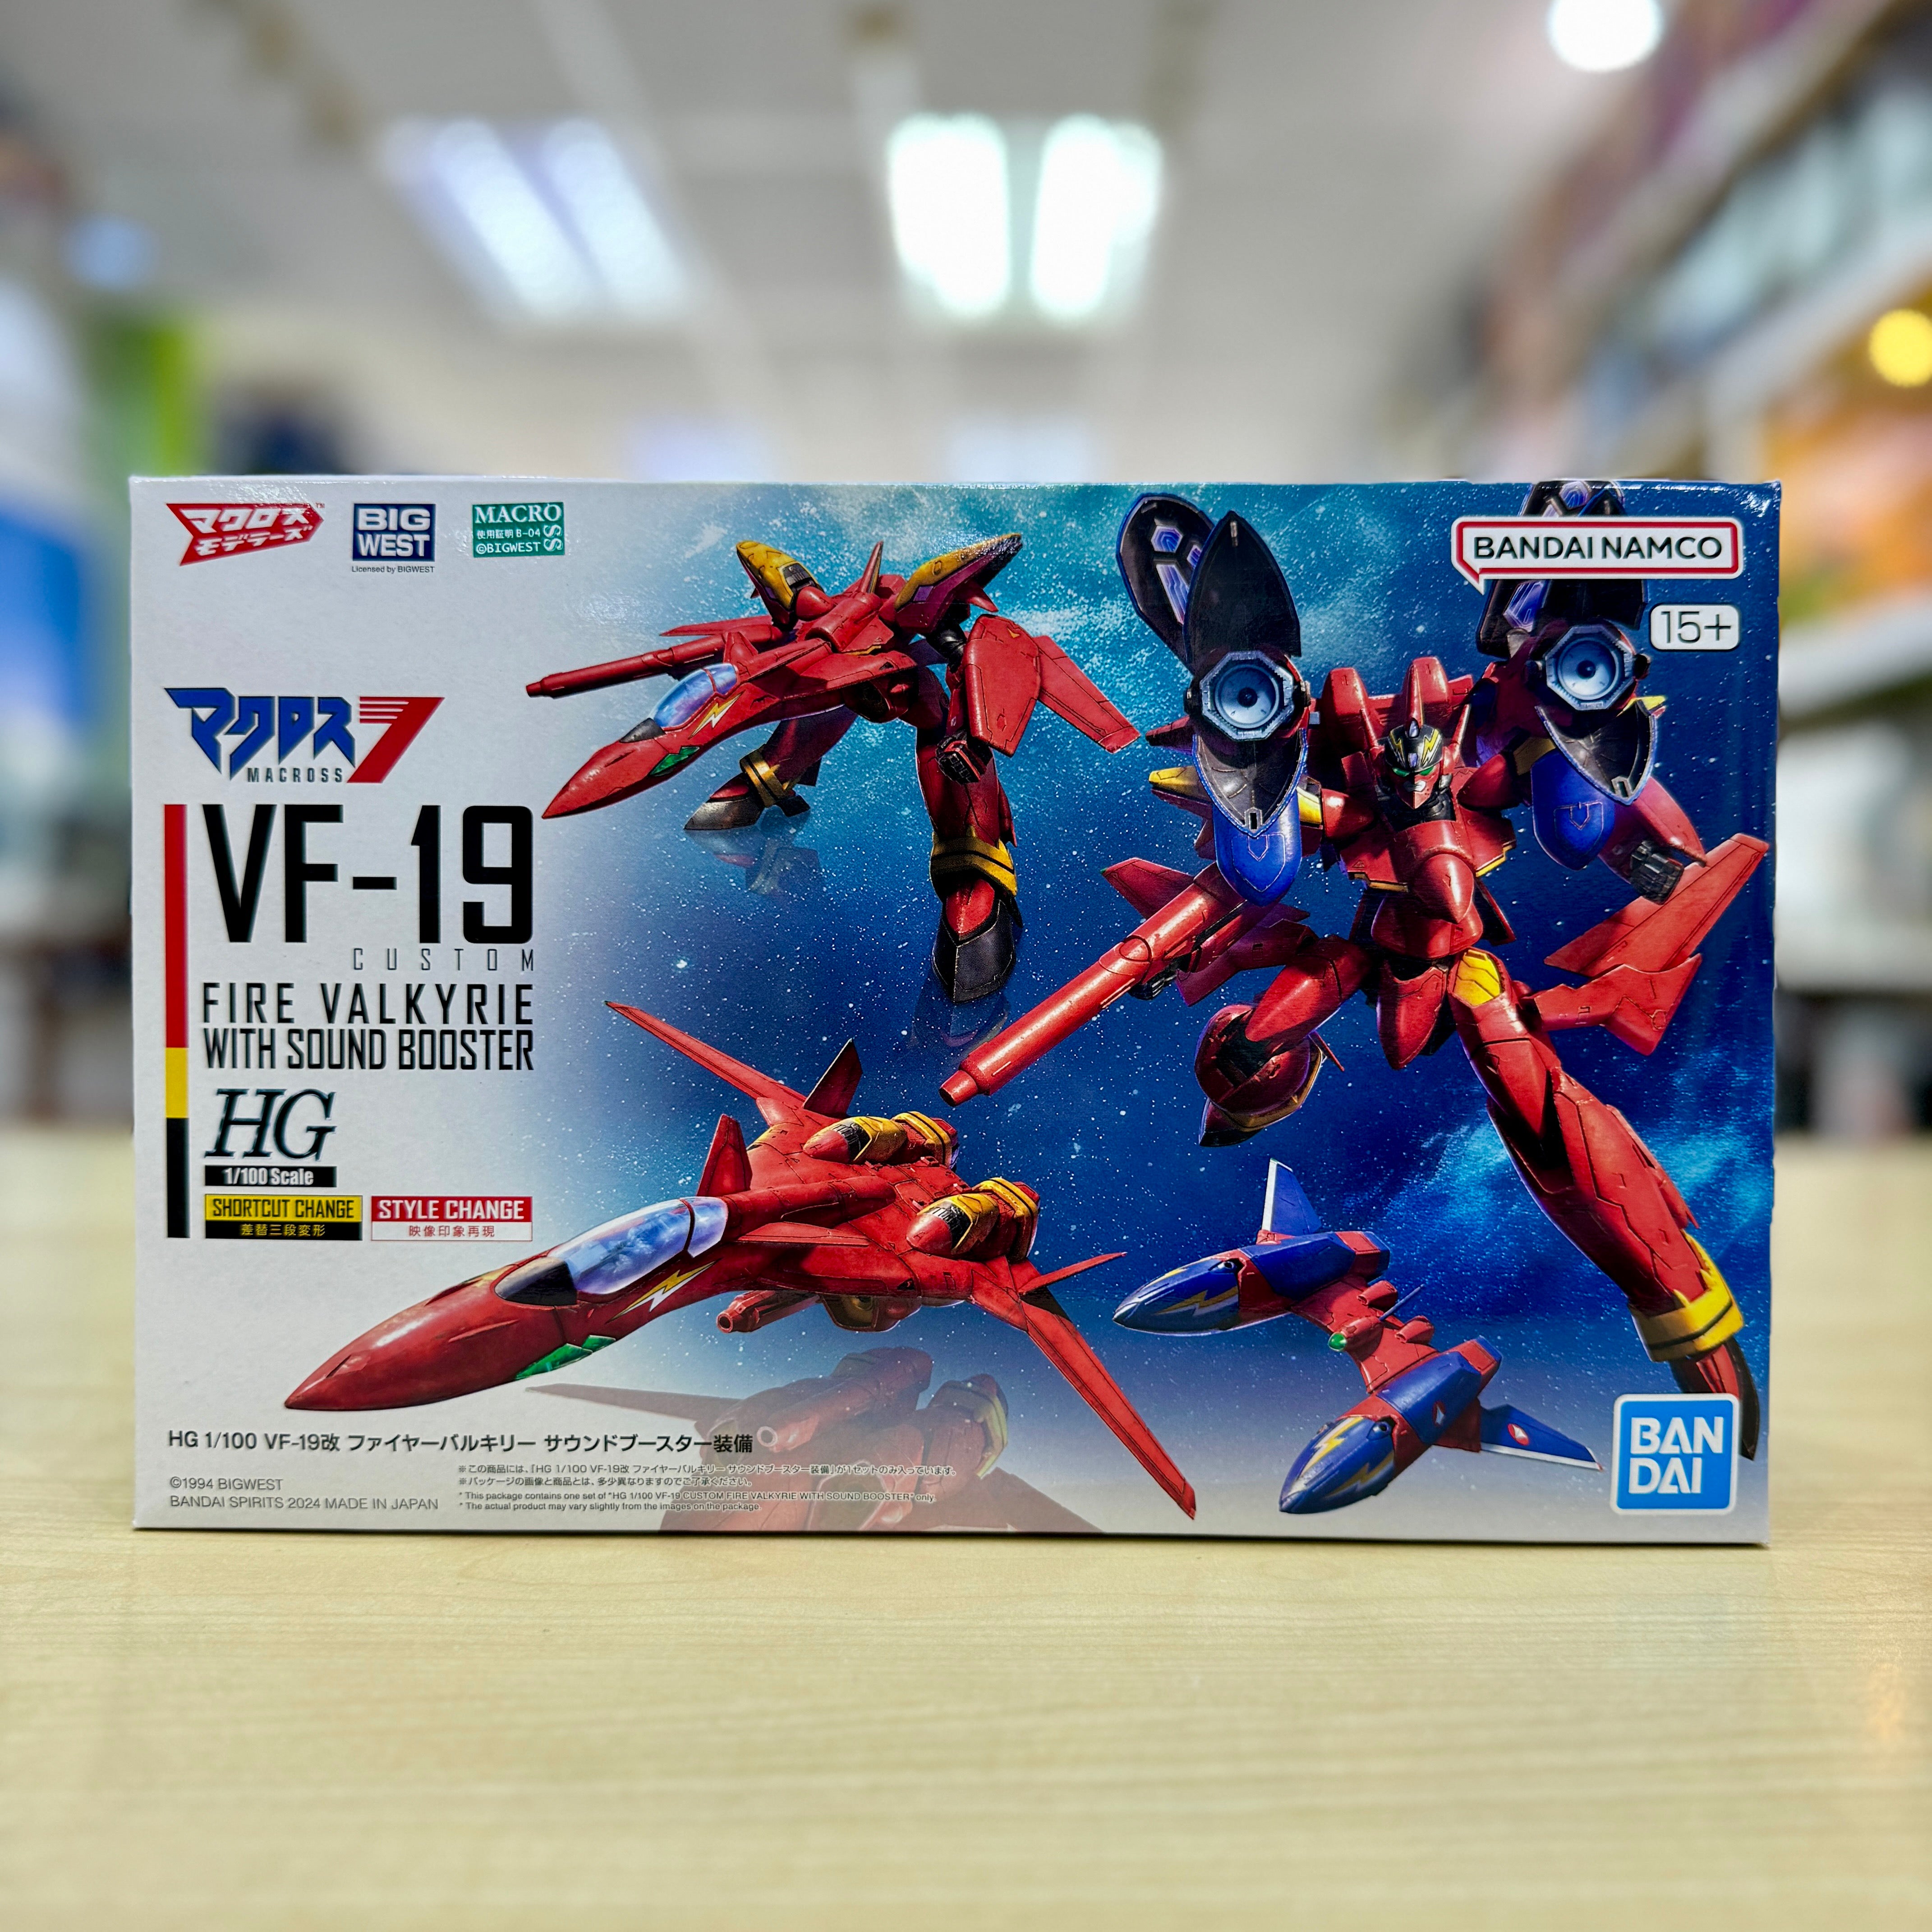 HG 1/100 VF-19 Custom Fire Valkyrie with Sound Booster - Macross 7 Anniversary Edition